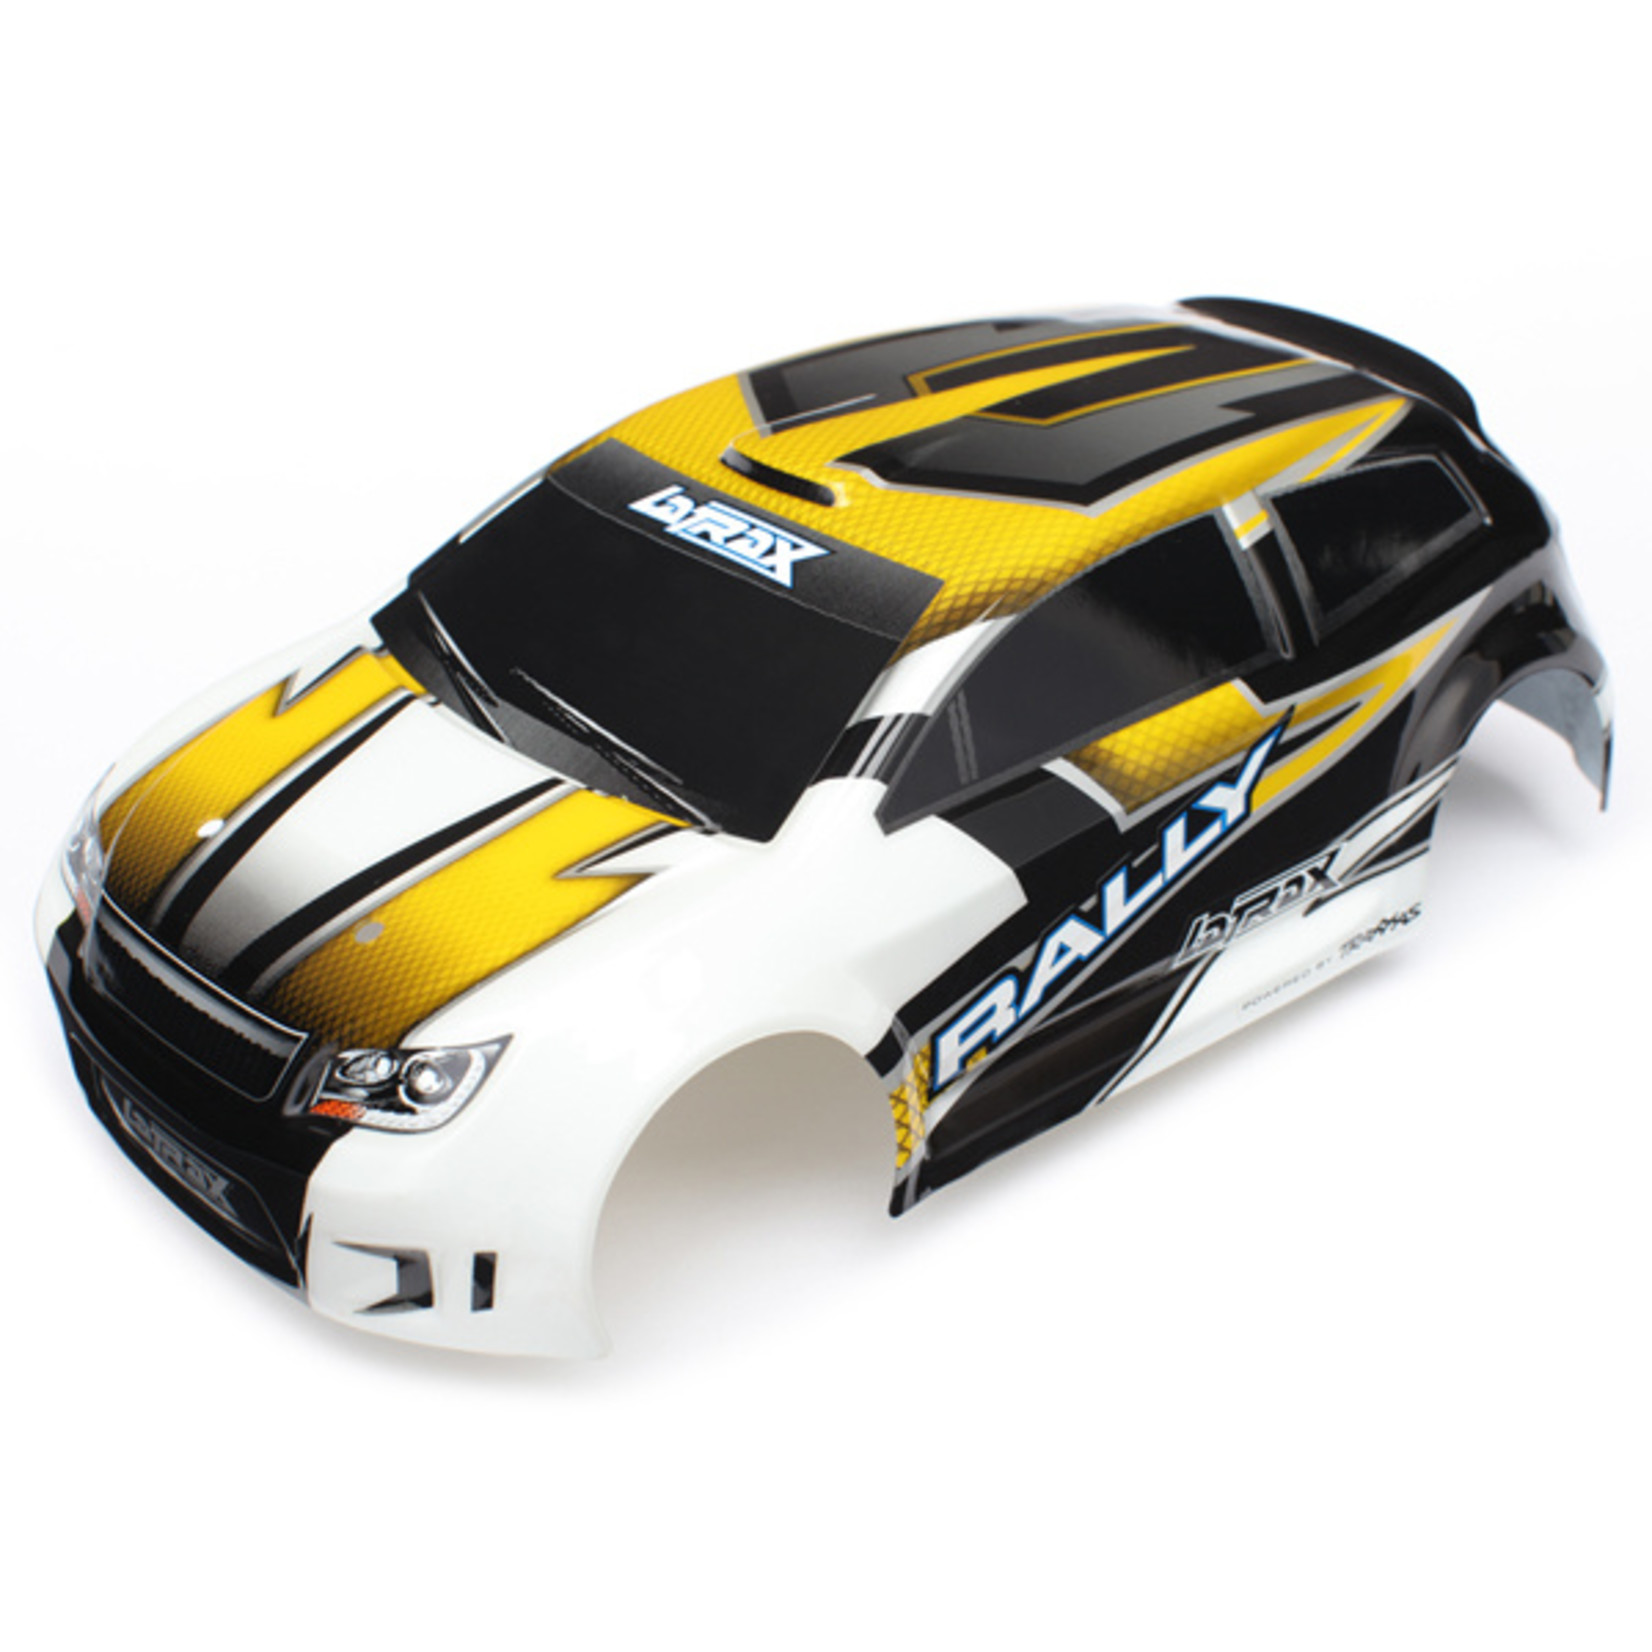 Traxxas 7512 - Body, LaTrax Rally, yellow (painted)/ decal